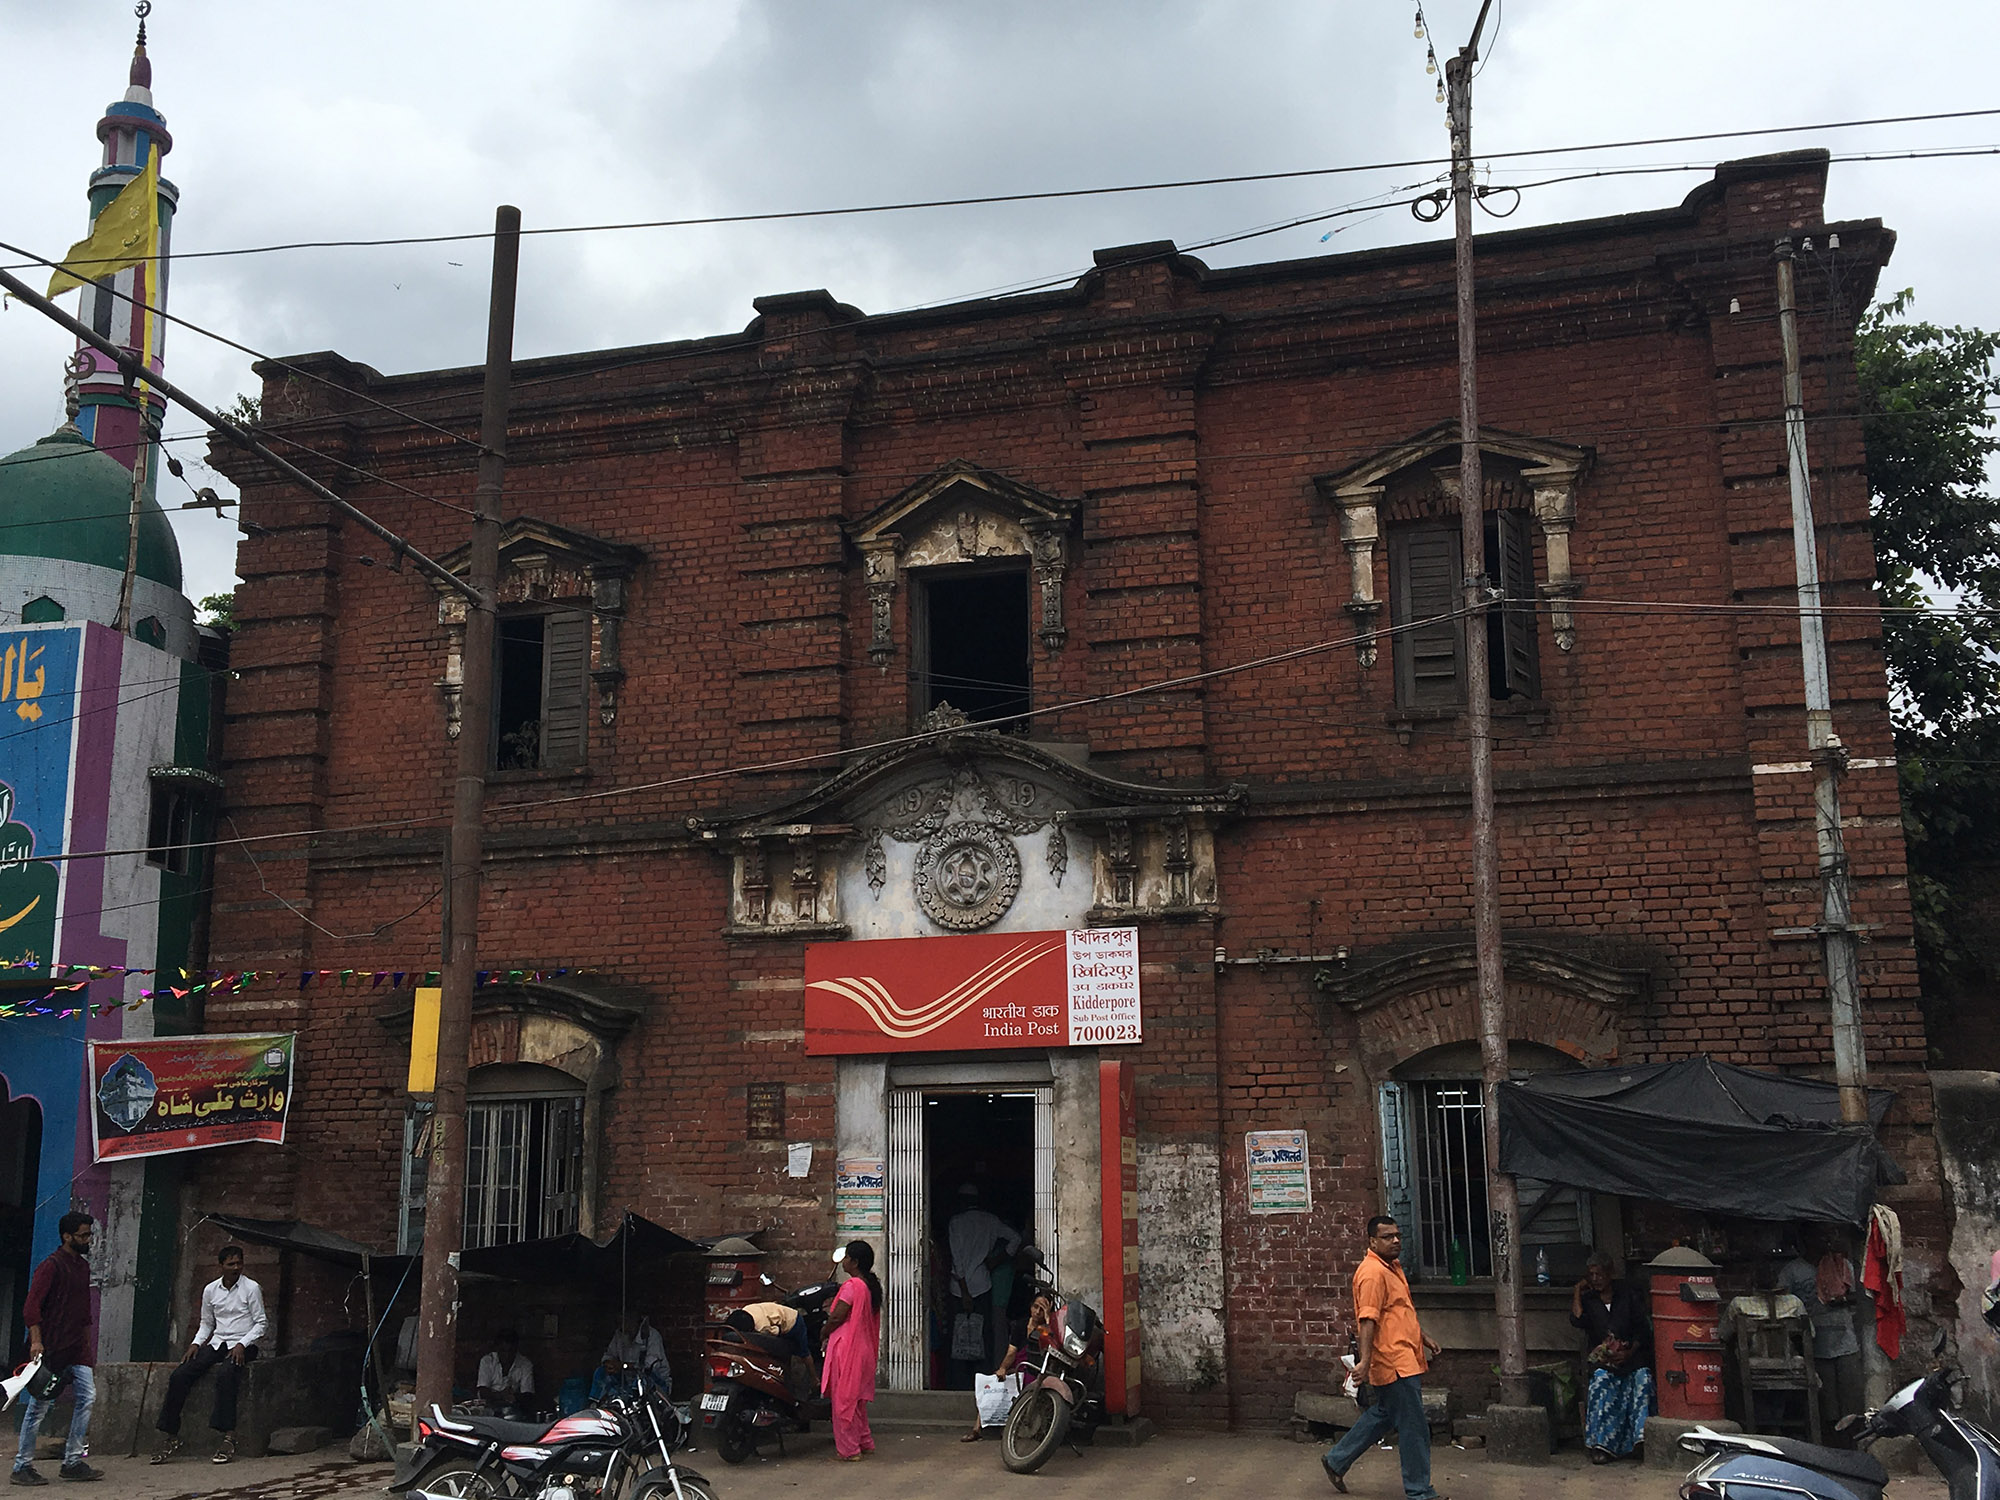 A dilapidated mansion-style building from 1919 that has been converted into a post office; detailed Indo-Corinthian pilaster work and wooden Venetian windows can be seen on its facade [Neha Banka/Al Jazeera]